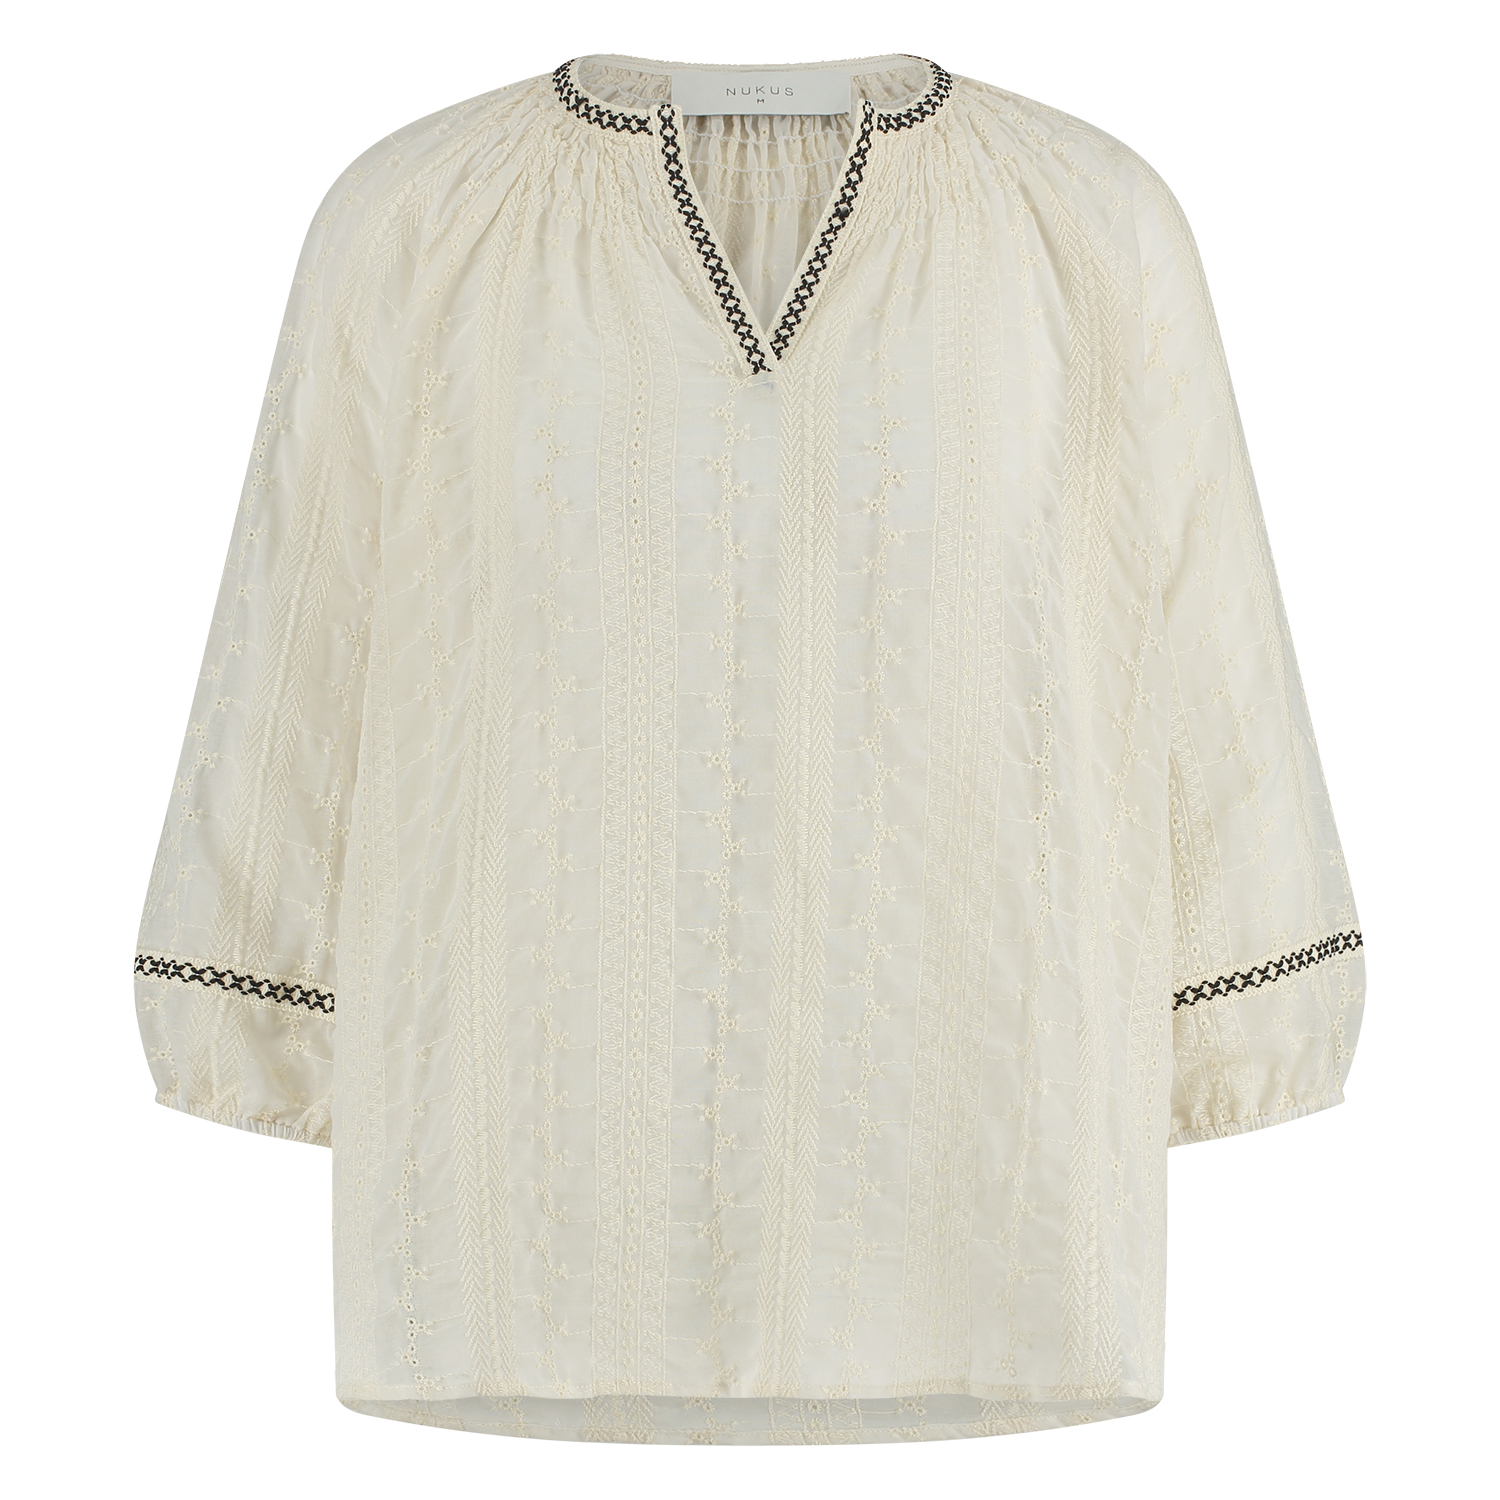 NUKUS Summer Blouse Embroidery Off White